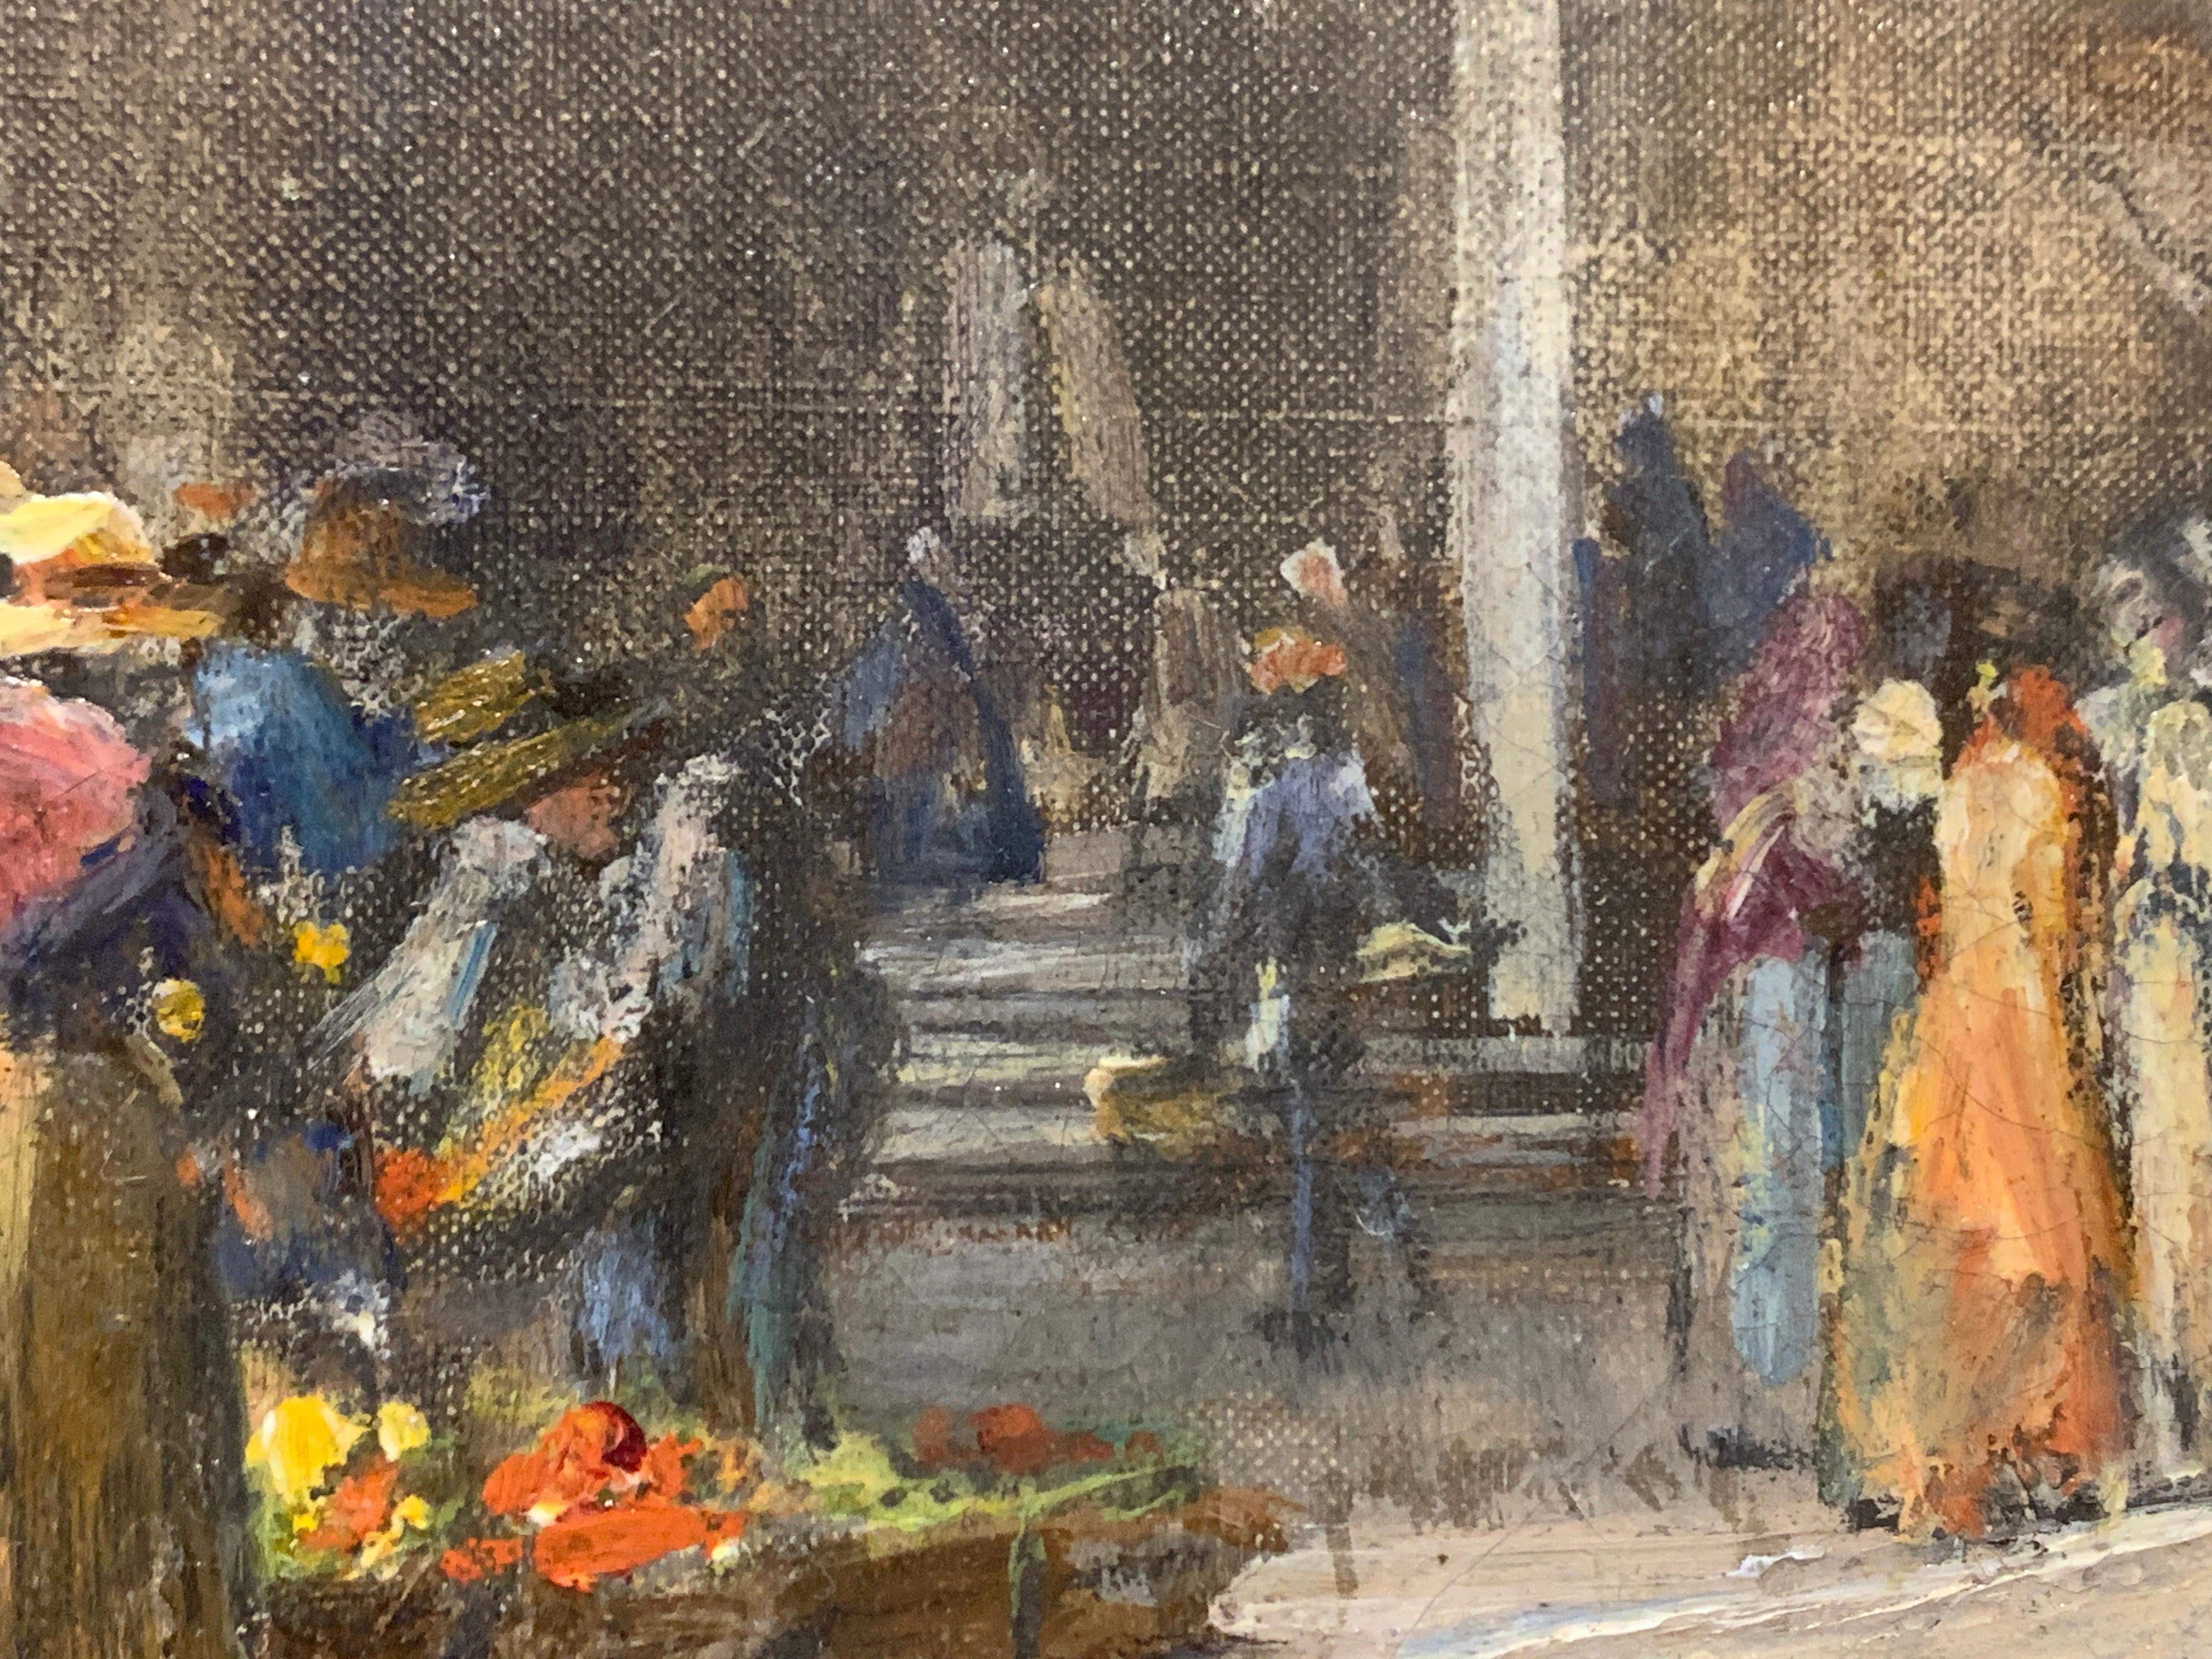 Rialto Outdoor Market Venice An Oil painting On Canvas by Walter Francis Brown 2